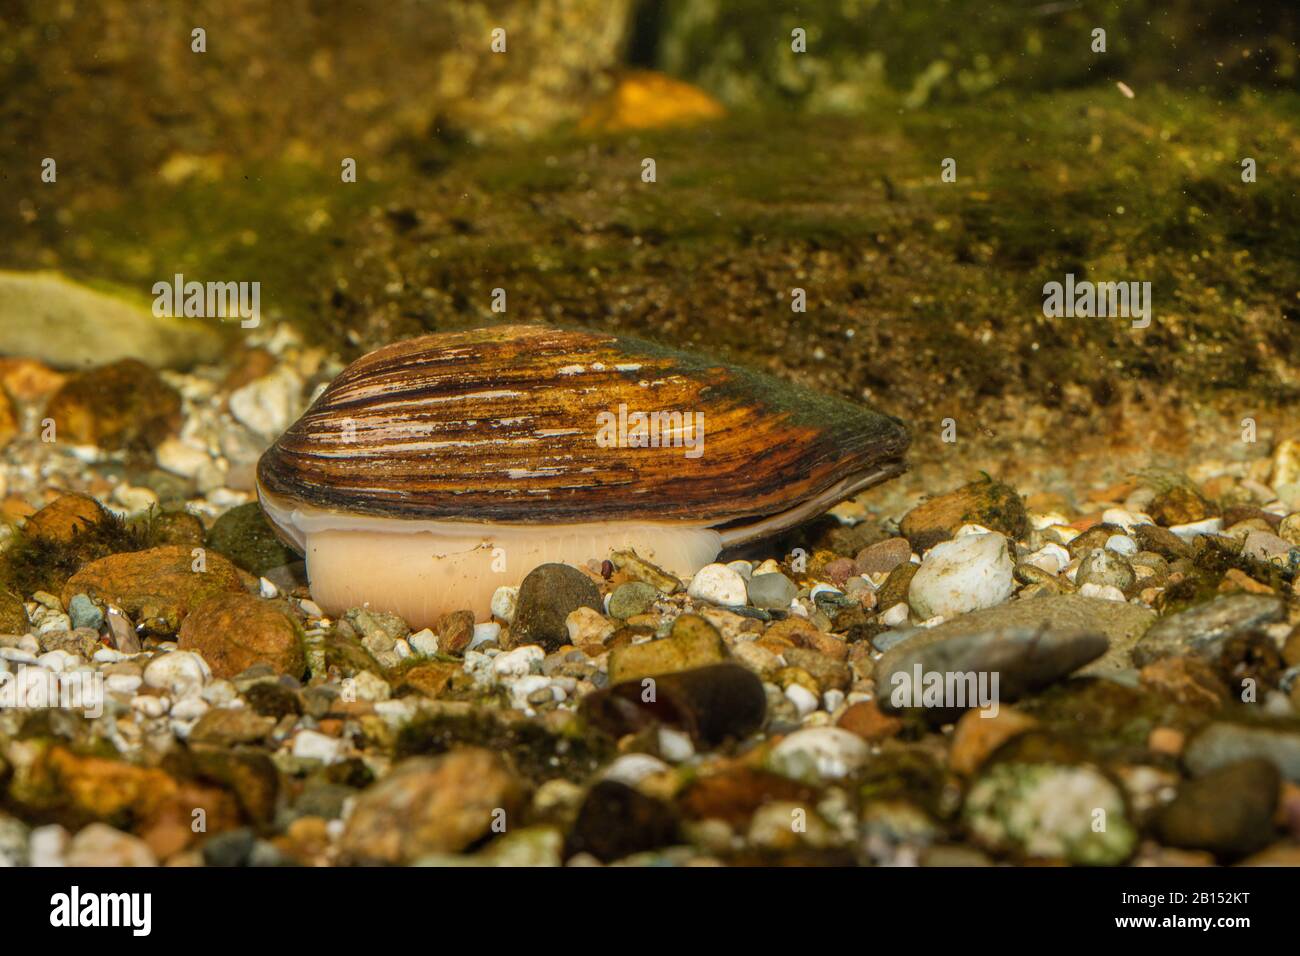 Common pond mussel, duck mussel (Anodonta anatina), digs in the ground with its foot, Germany Stock Photo